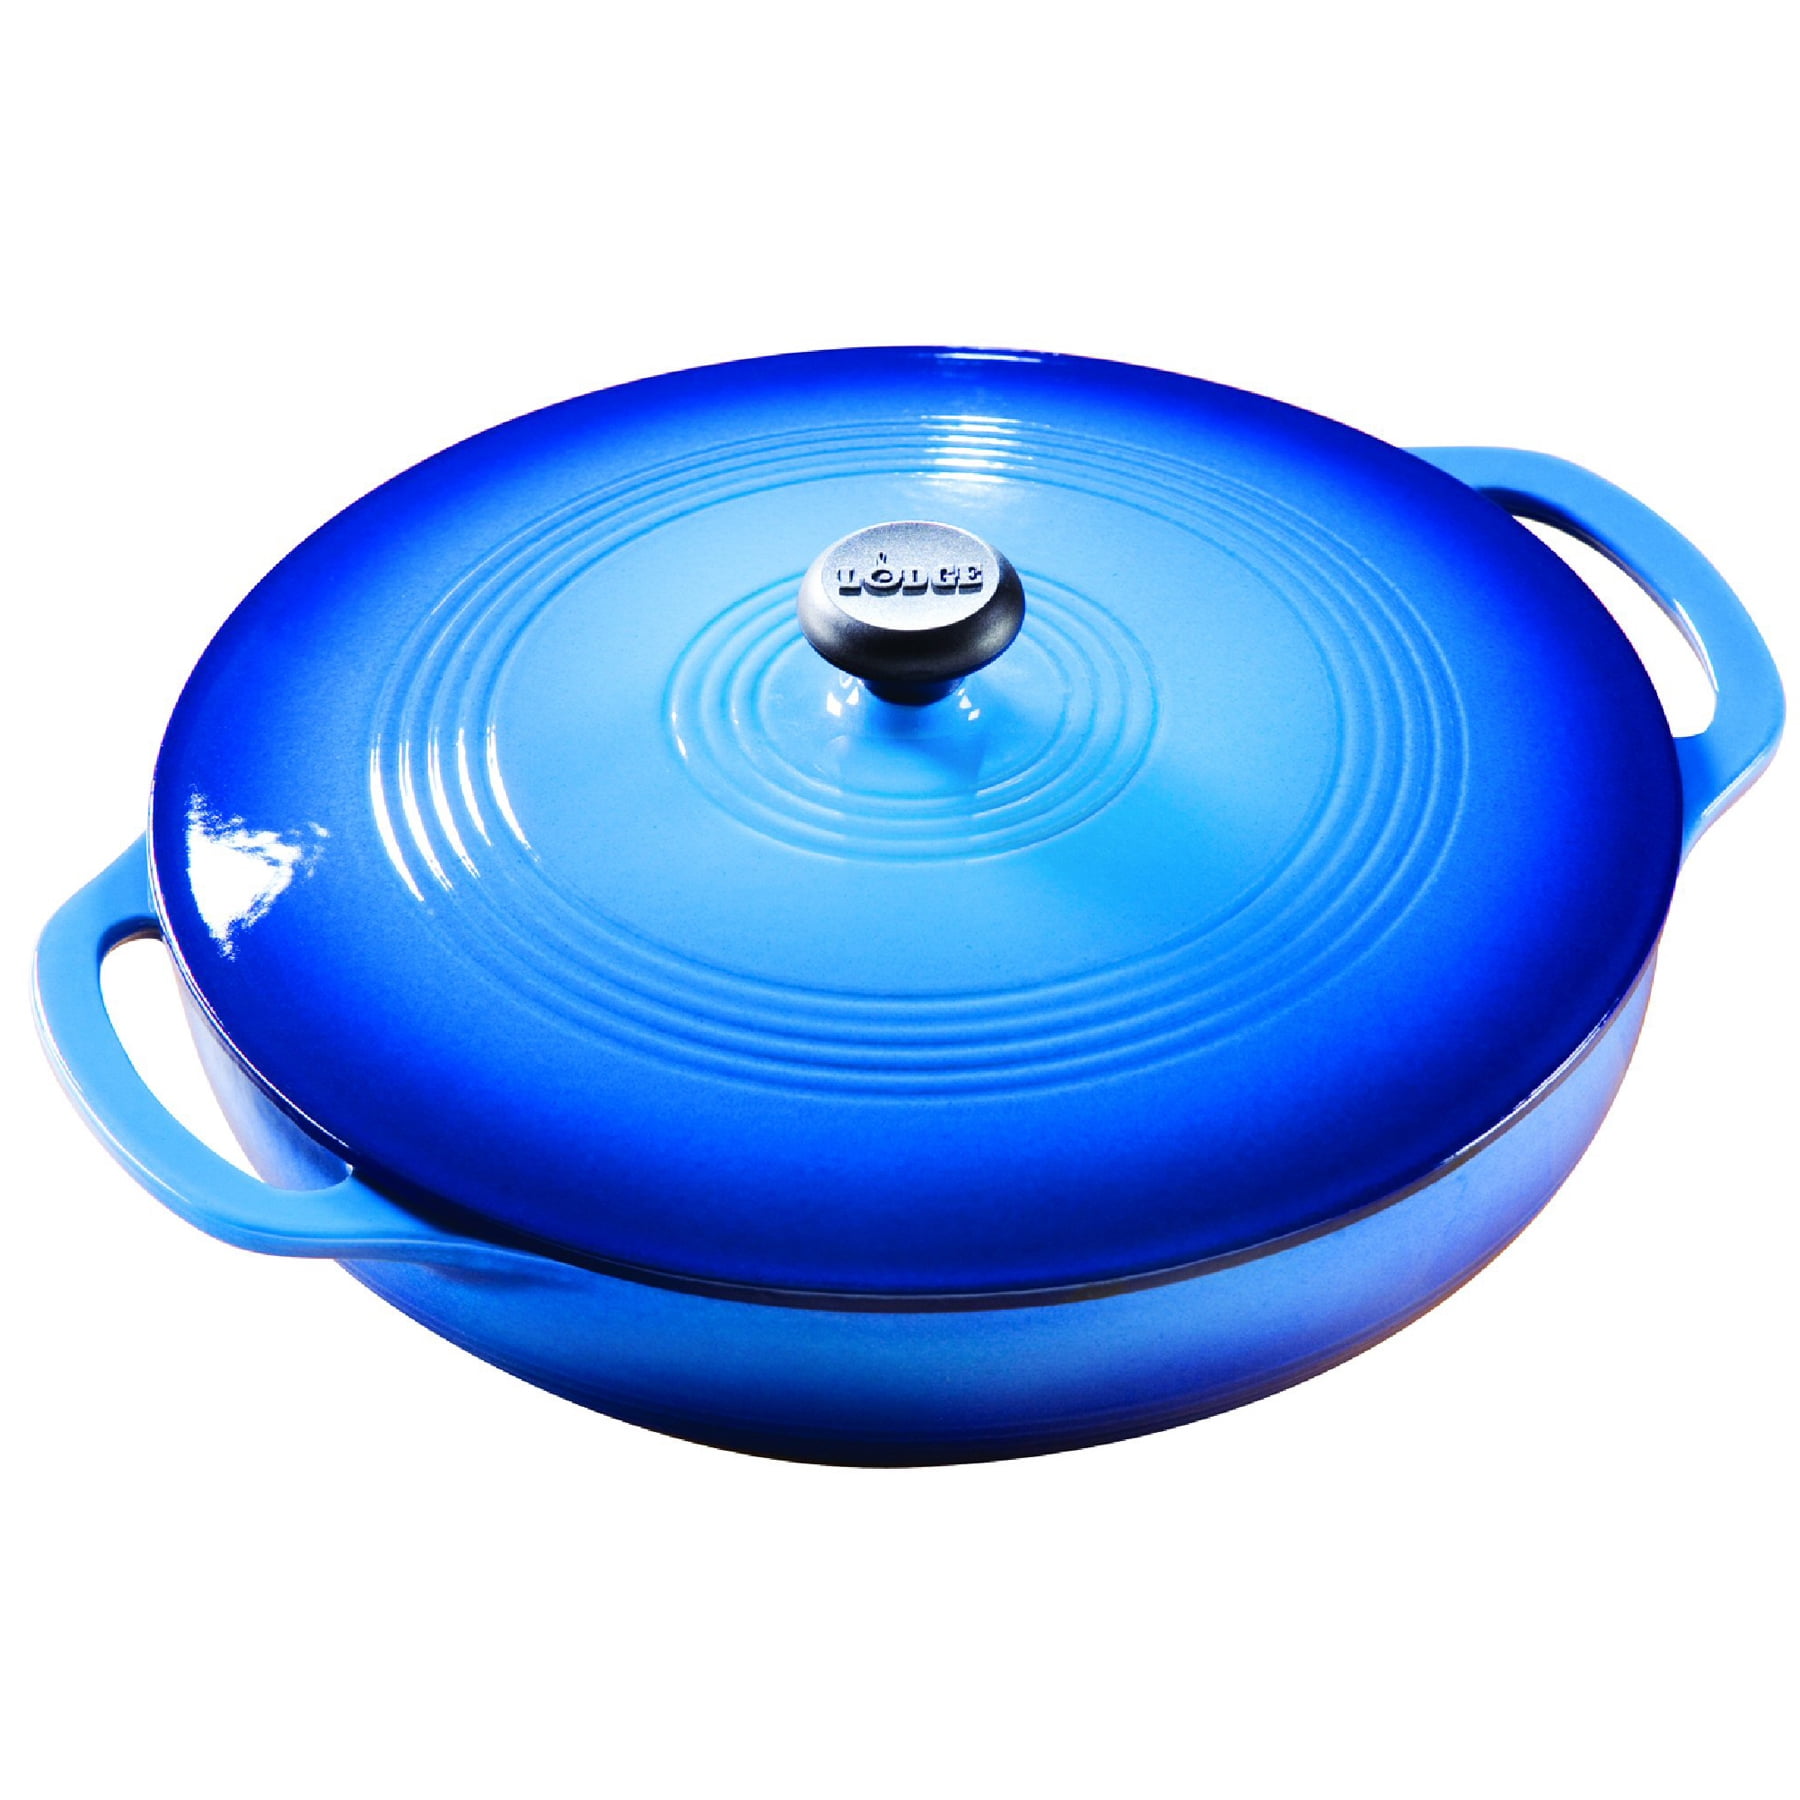  Lodge 3.6 Quart Enameled Cast Iron Oval Casserole With Lid–  Dual Handles – Oven Safe up to 500° F or on Stovetop - Use to Marinate,  Cook, Bake, Refrigerate and Serve –